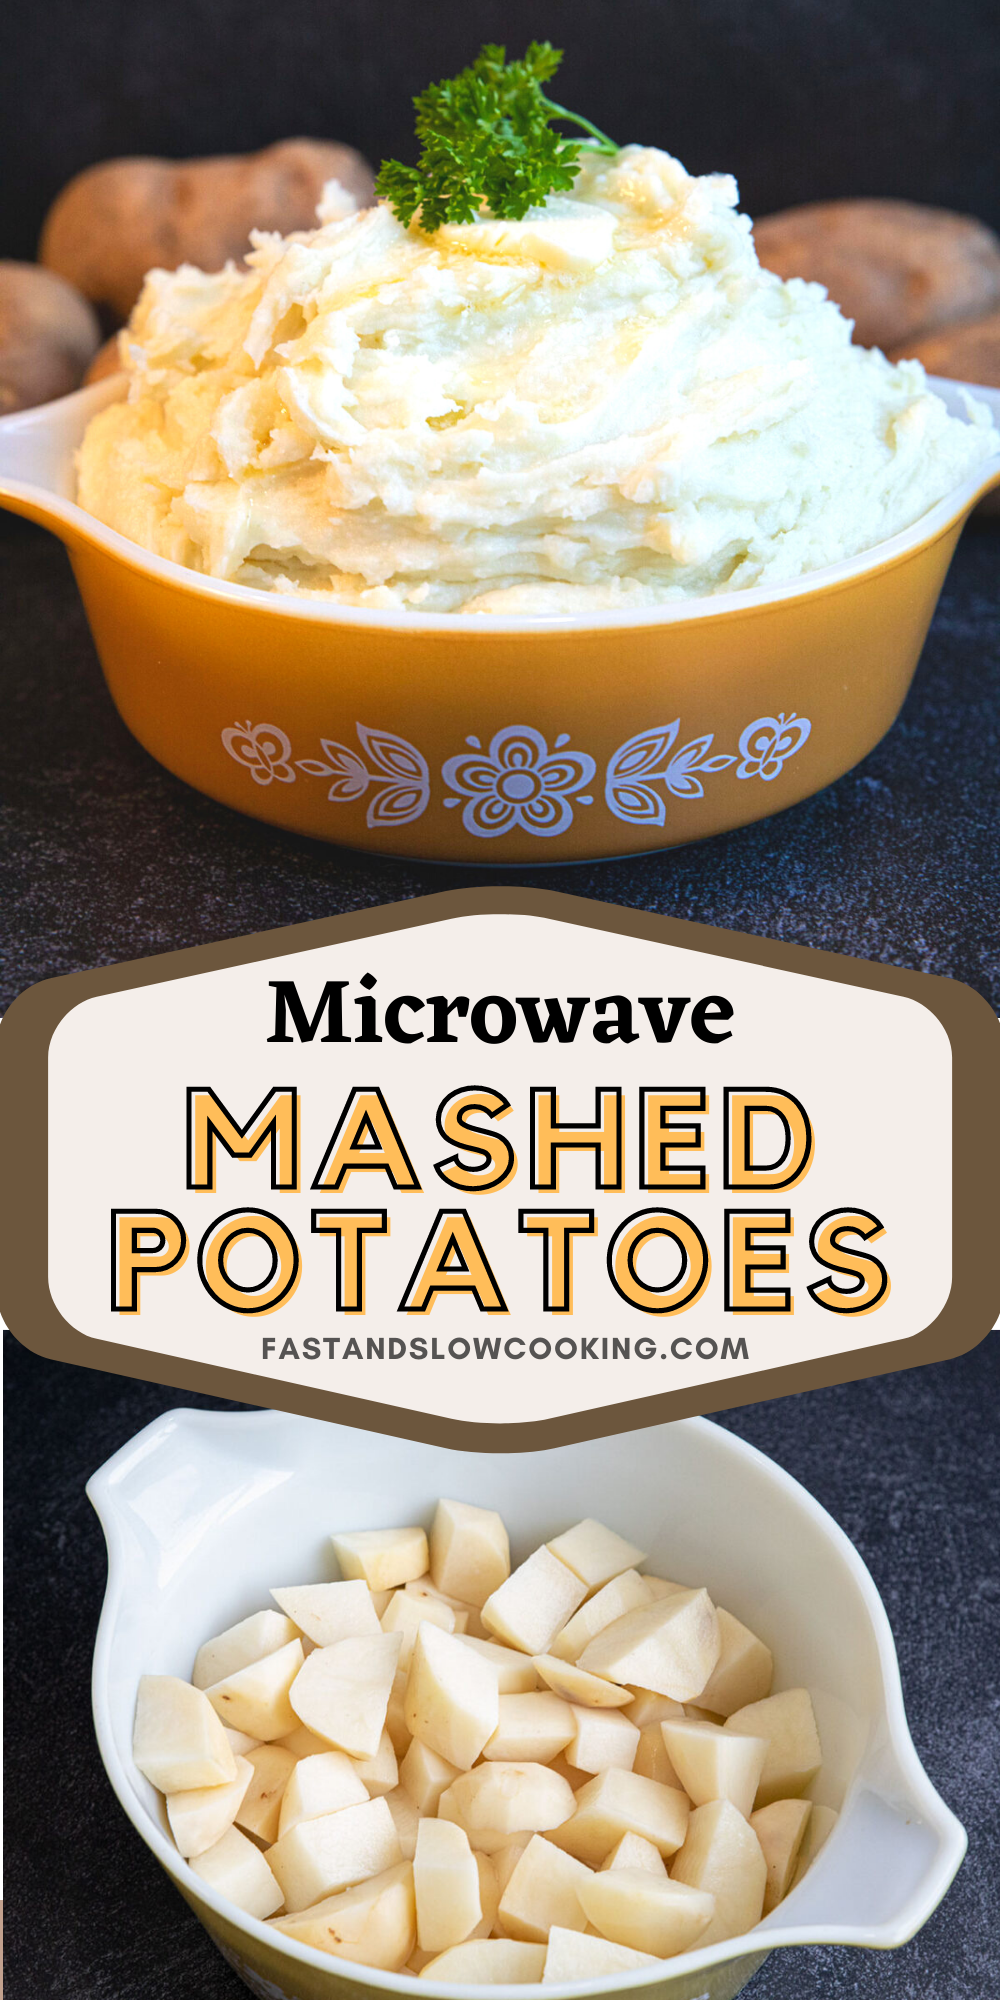 Looking for an easy way to do mashed potatoes in a hurry? Microwave mashed potatoes are quick, easy and believe it or not, completely doable!
